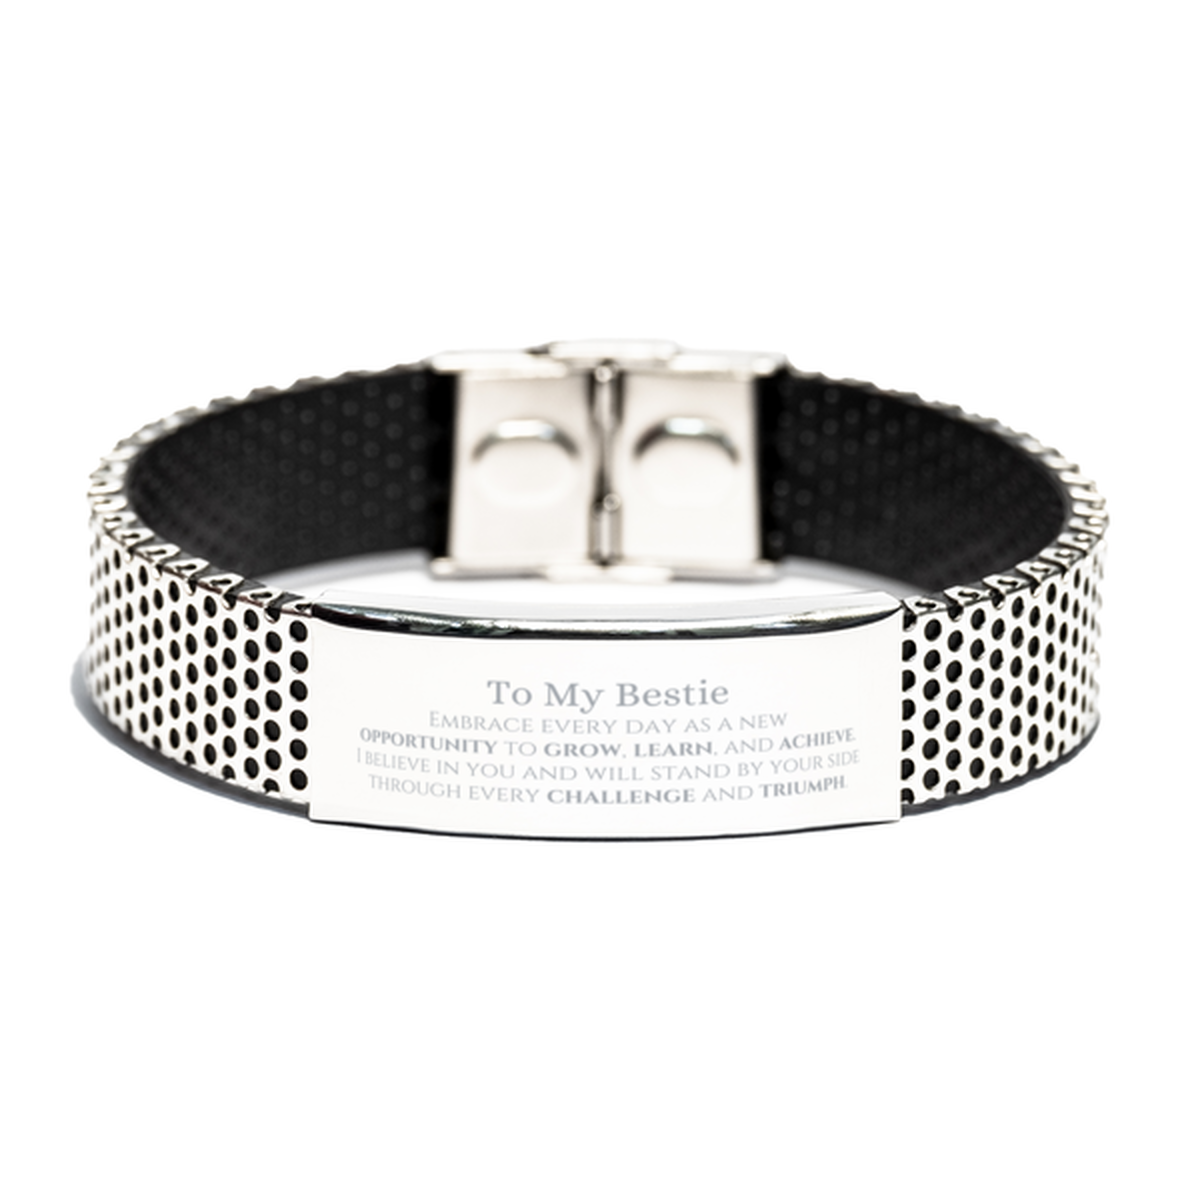 To My Bestie Gifts, I believe in you and will stand by your side, Inspirational Stainless Steel Bracelet For Bestie, Birthday Christmas Motivational Bestie Gifts